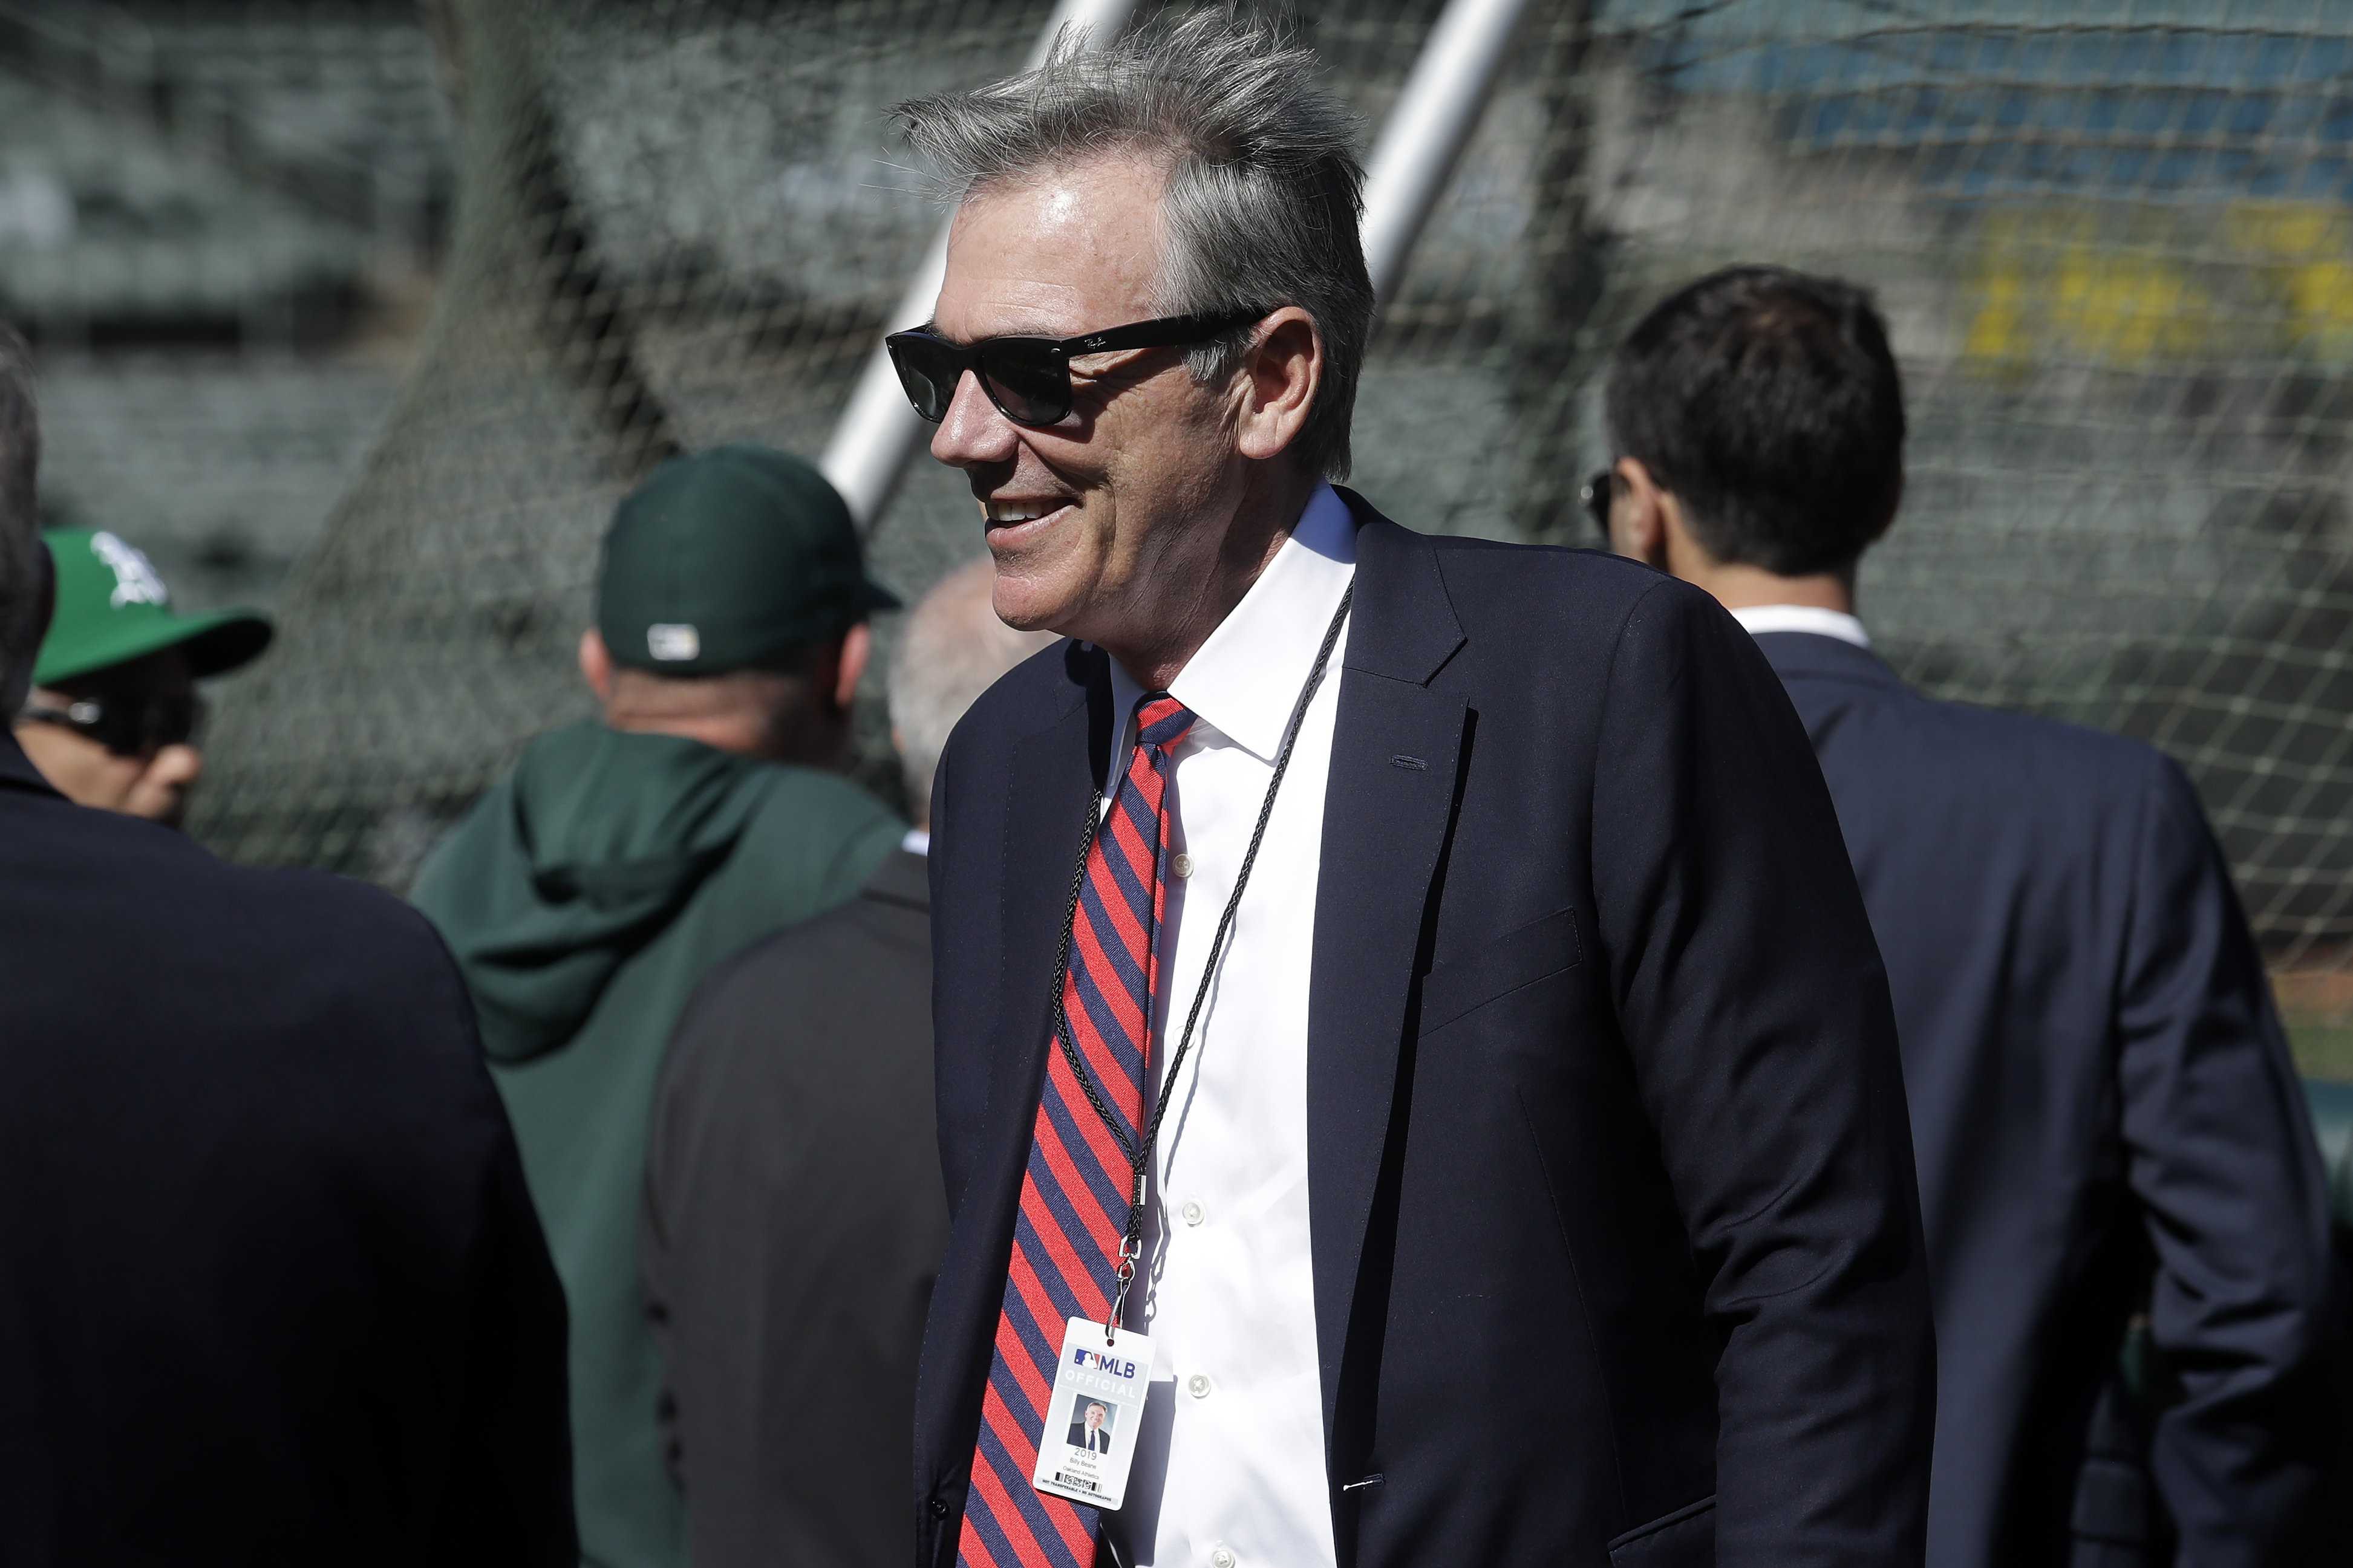 A's GM Billy Beane joins former Yankee in bringing Moneyball to Dutch  soccer team